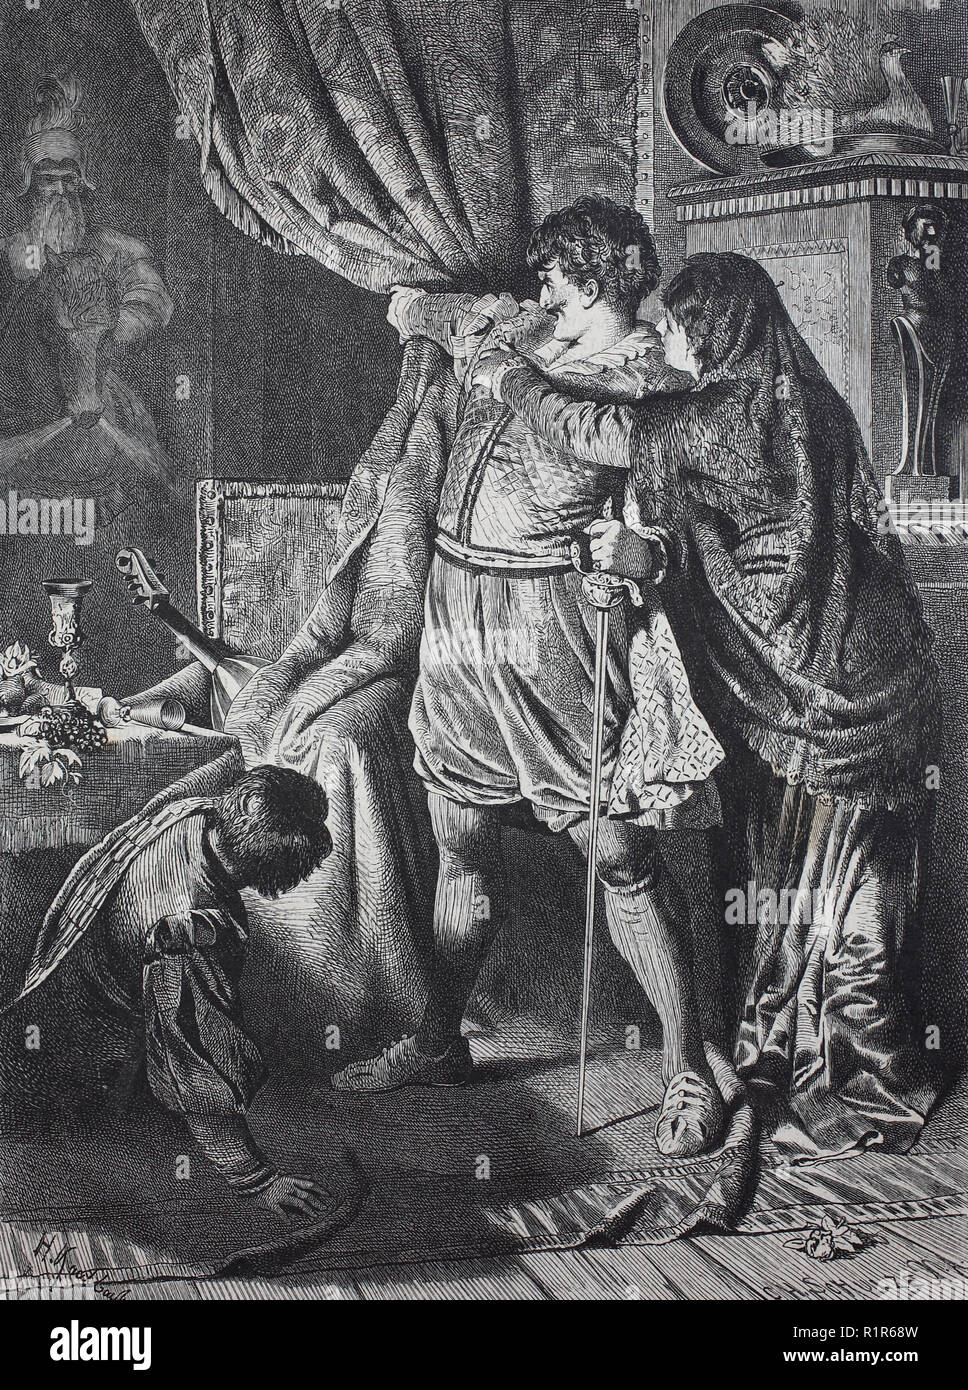 Digital improved reproduction, a scene from the Opera Don Juan by Mozart, original print from the year 1880 Stock Photo